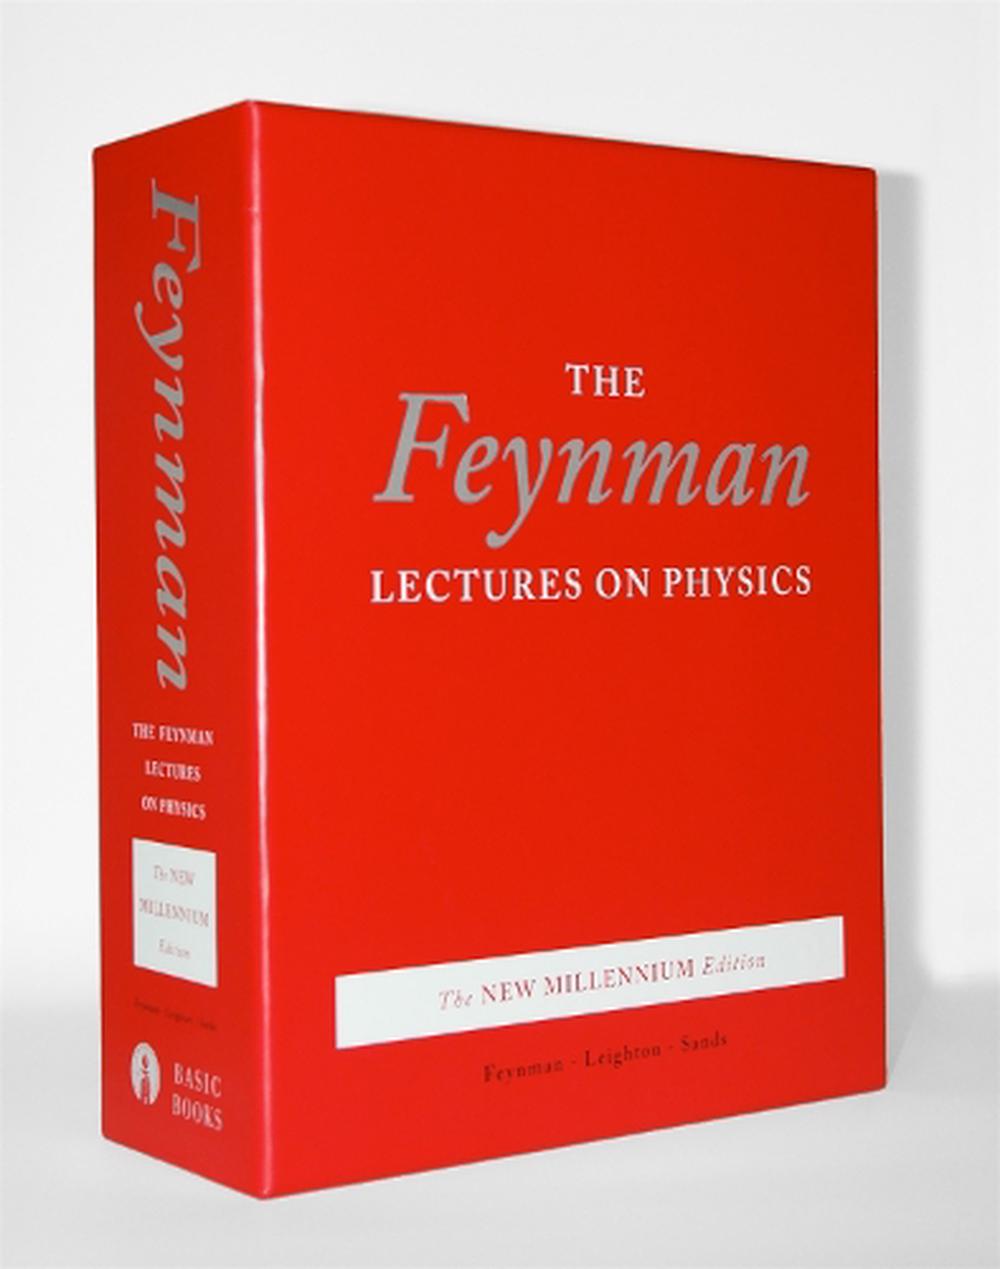 The Feynman Lectures on Physics, boxed set by Richard P. Feynman ...